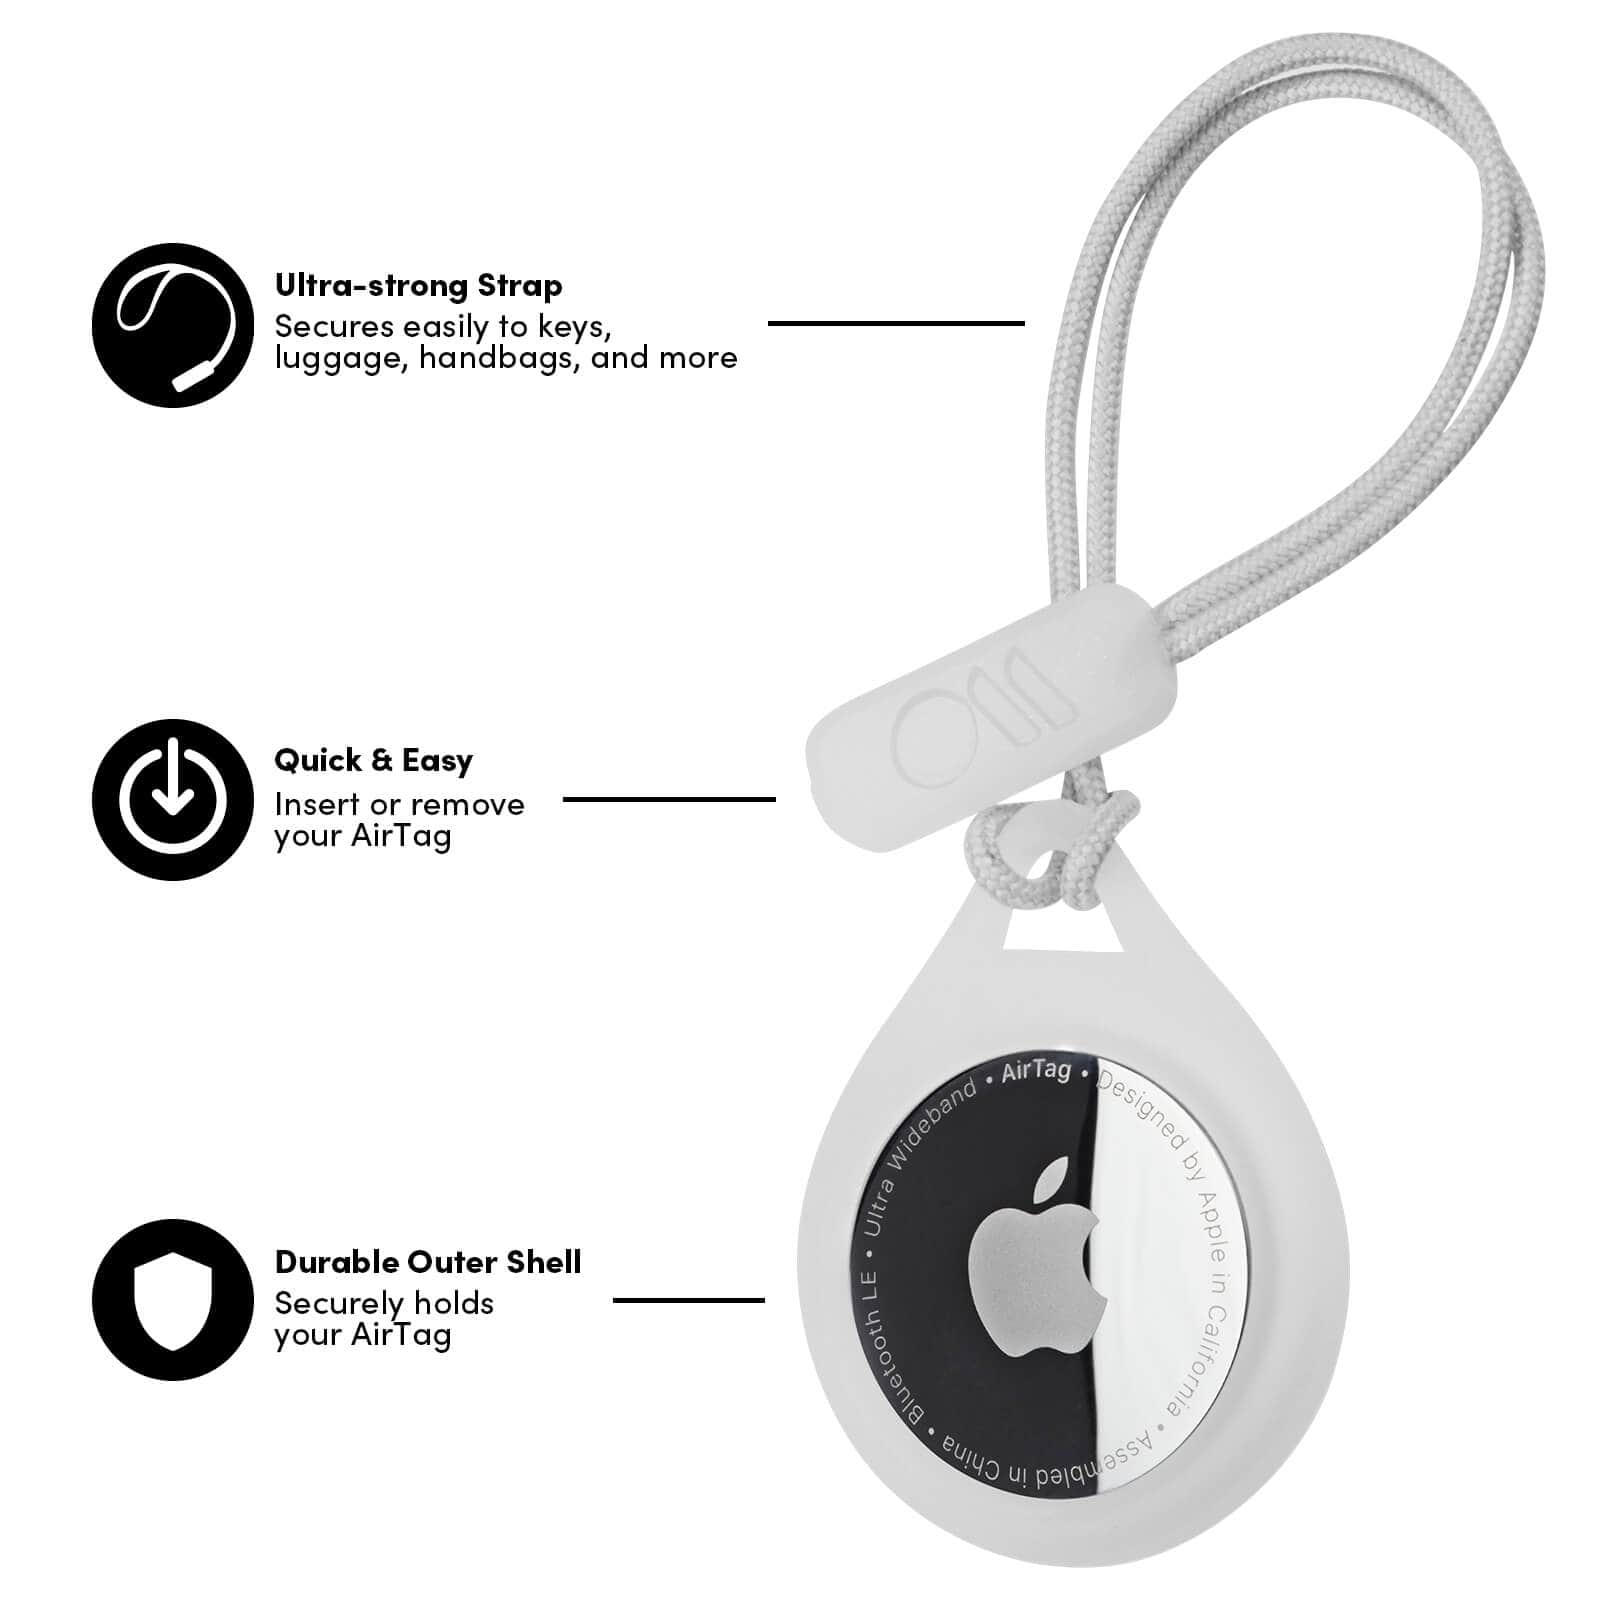 Ultra-strong Strap secures easily to keys, luggage, handbags, and more, Quick and easy, insert or remove your AirTag, Durable outer shell securely holds your airTag. color::Clear/Black/Navy/Blush